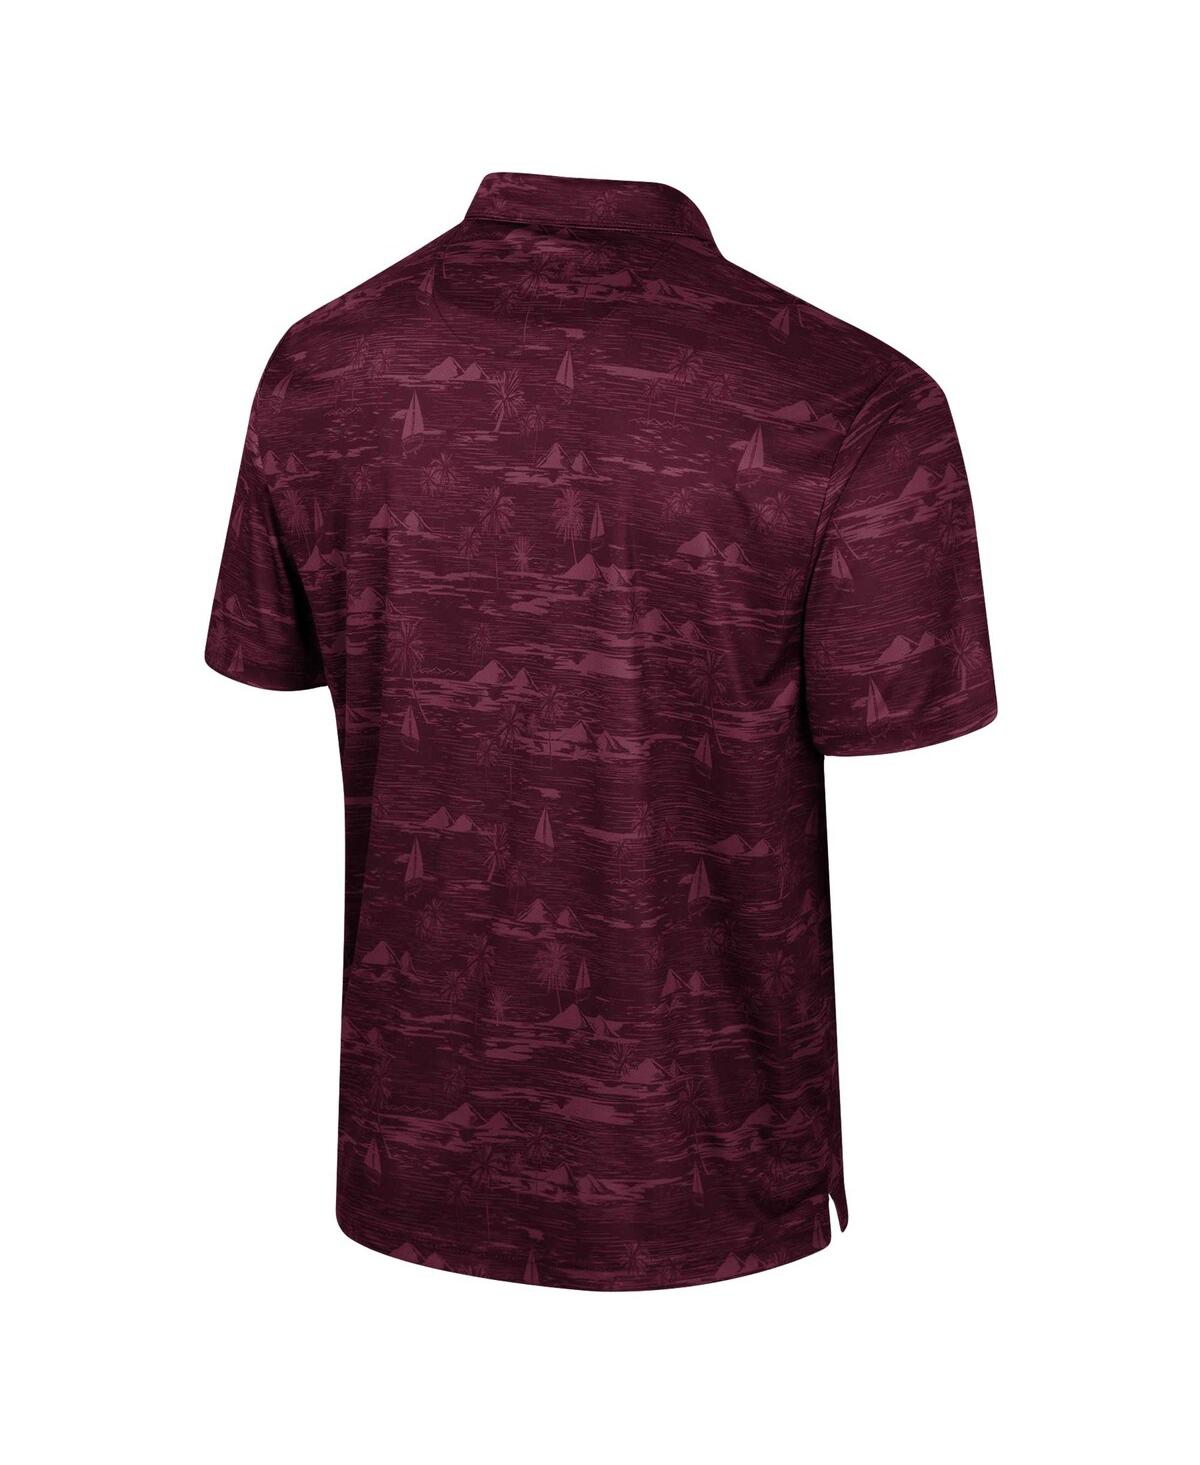 Shop Colosseum Men's  Maroon Mississippi State Bulldogs Daly Print Polo Shirt